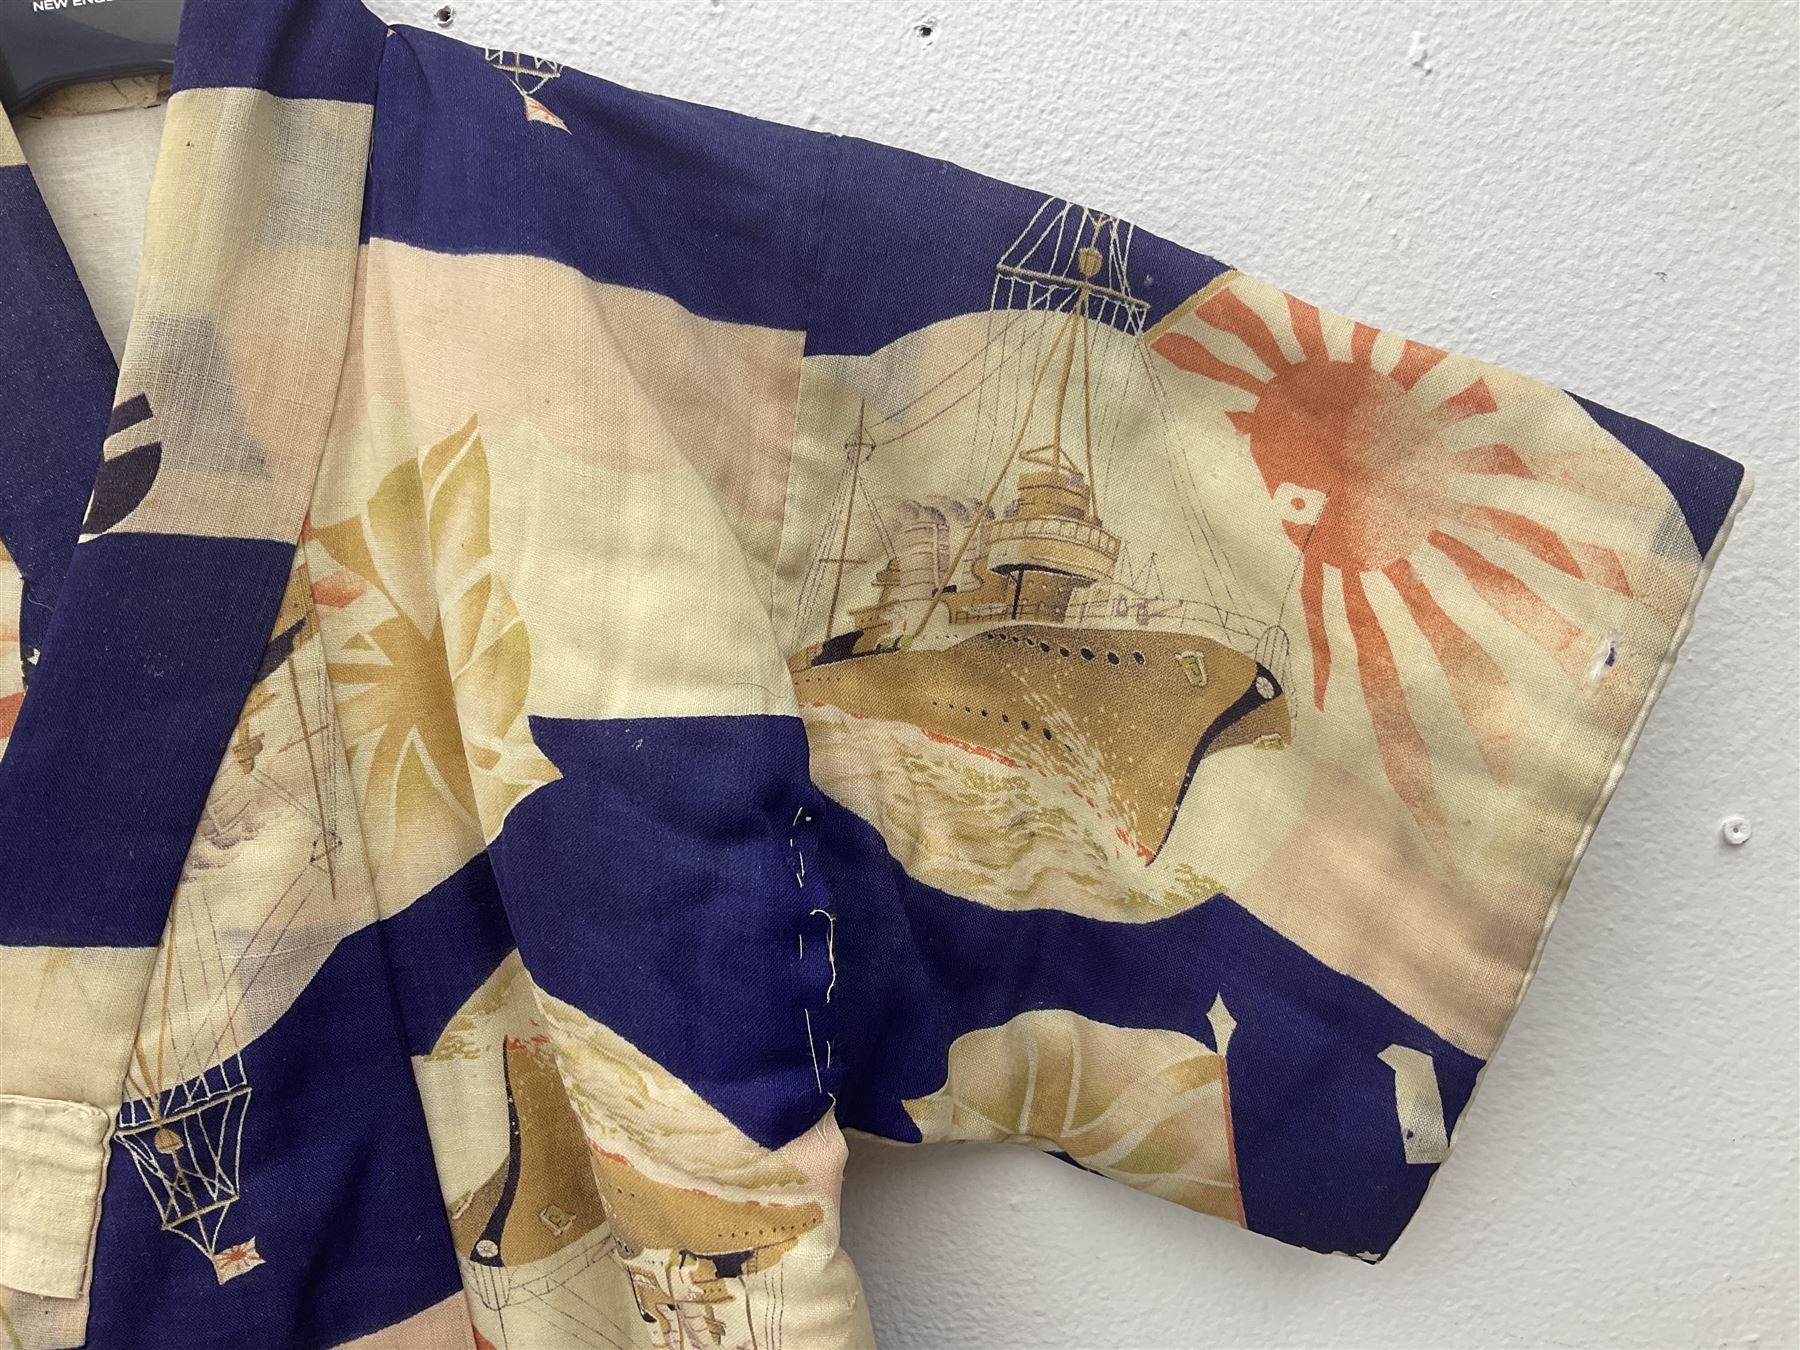 1930s Japanese fully lined kimono decorated with Japanese naval vessels and bi-planes - Image 15 of 24